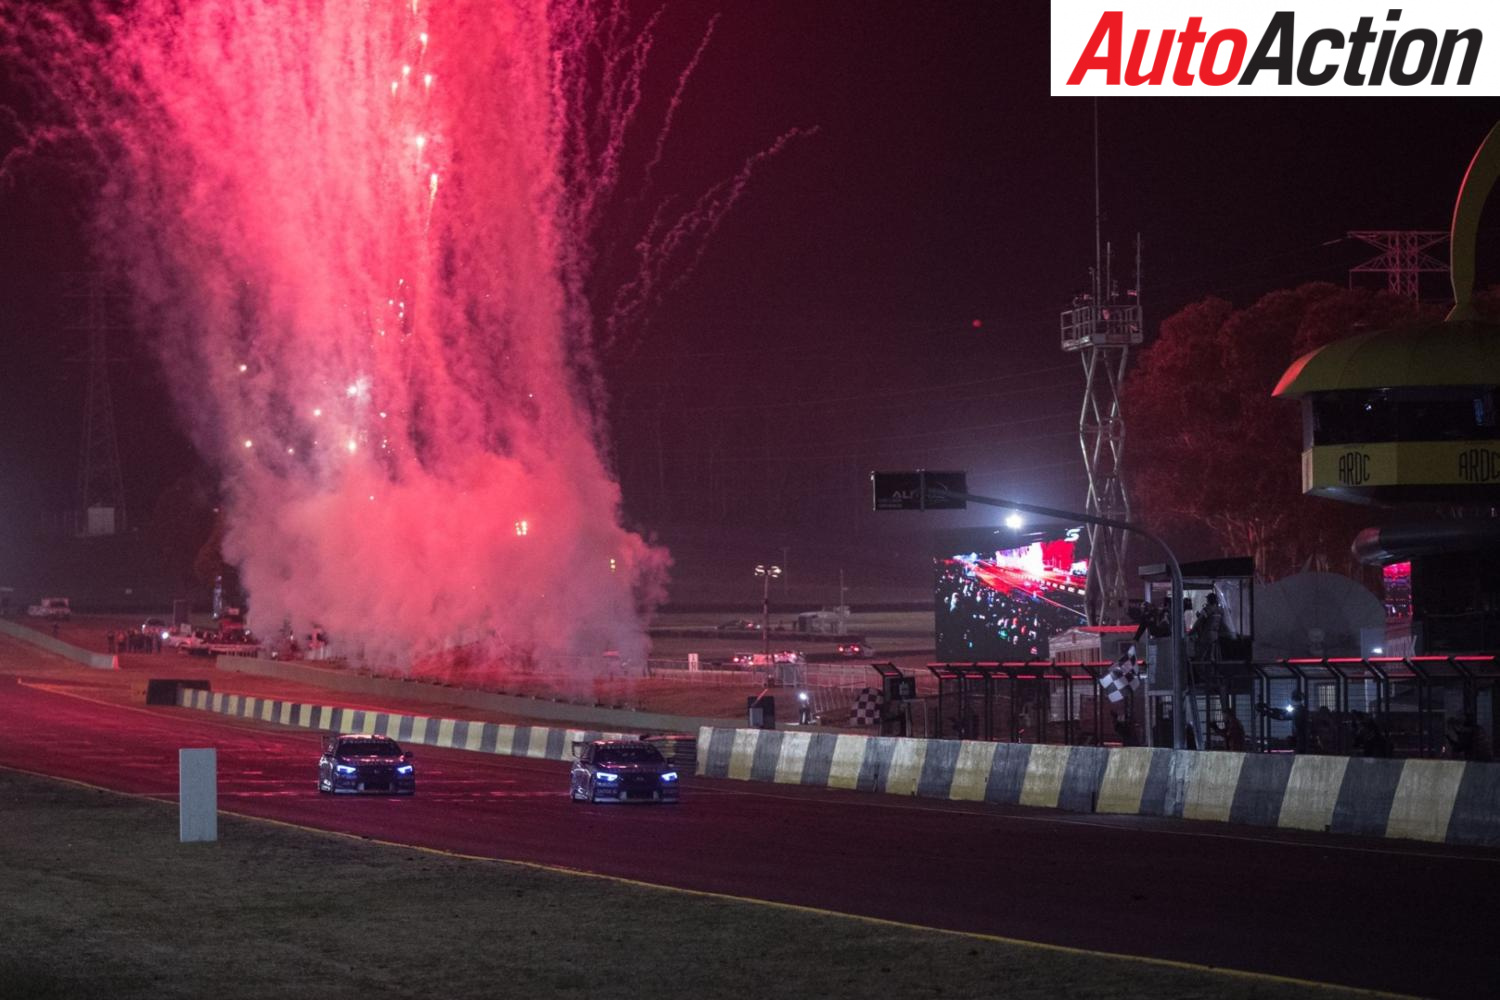 Sydney Motorsport Park dropped from the schedule for 2019 - Photo: InSyde Media